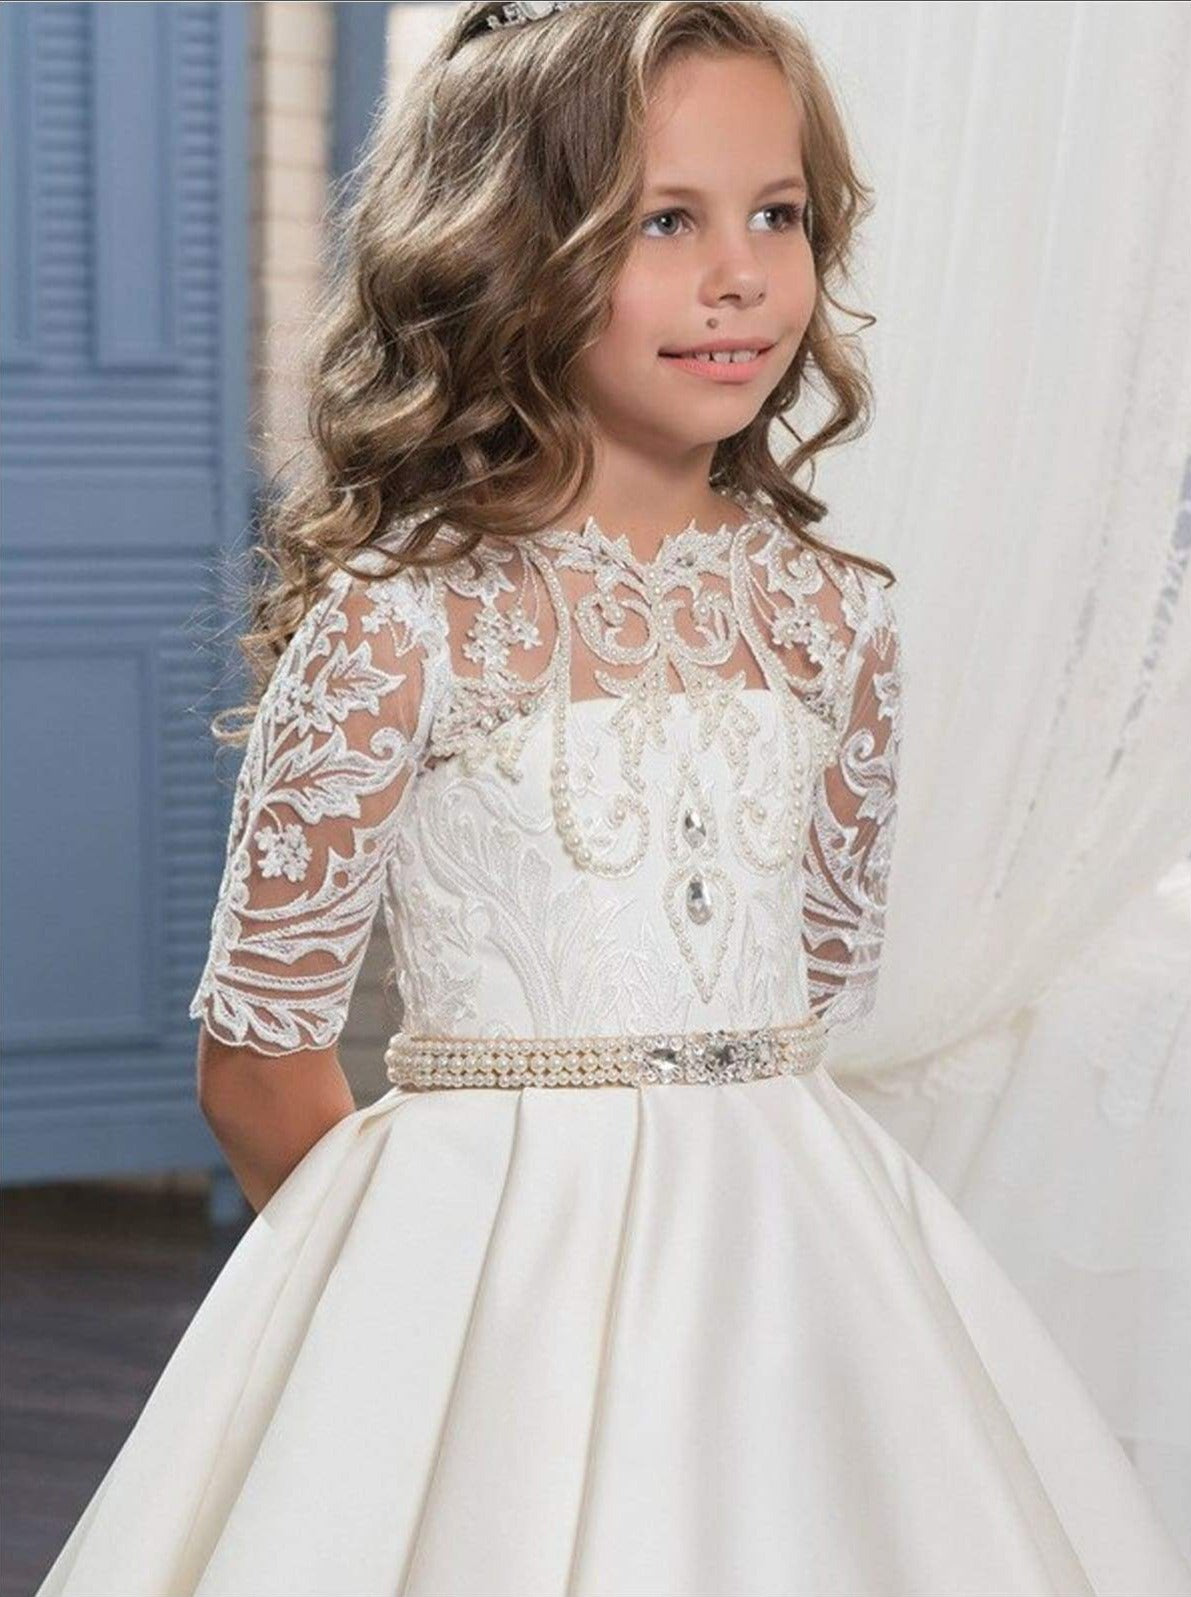 Girls Pearl Embellished Crochet Communion Gown - Girls Gowns